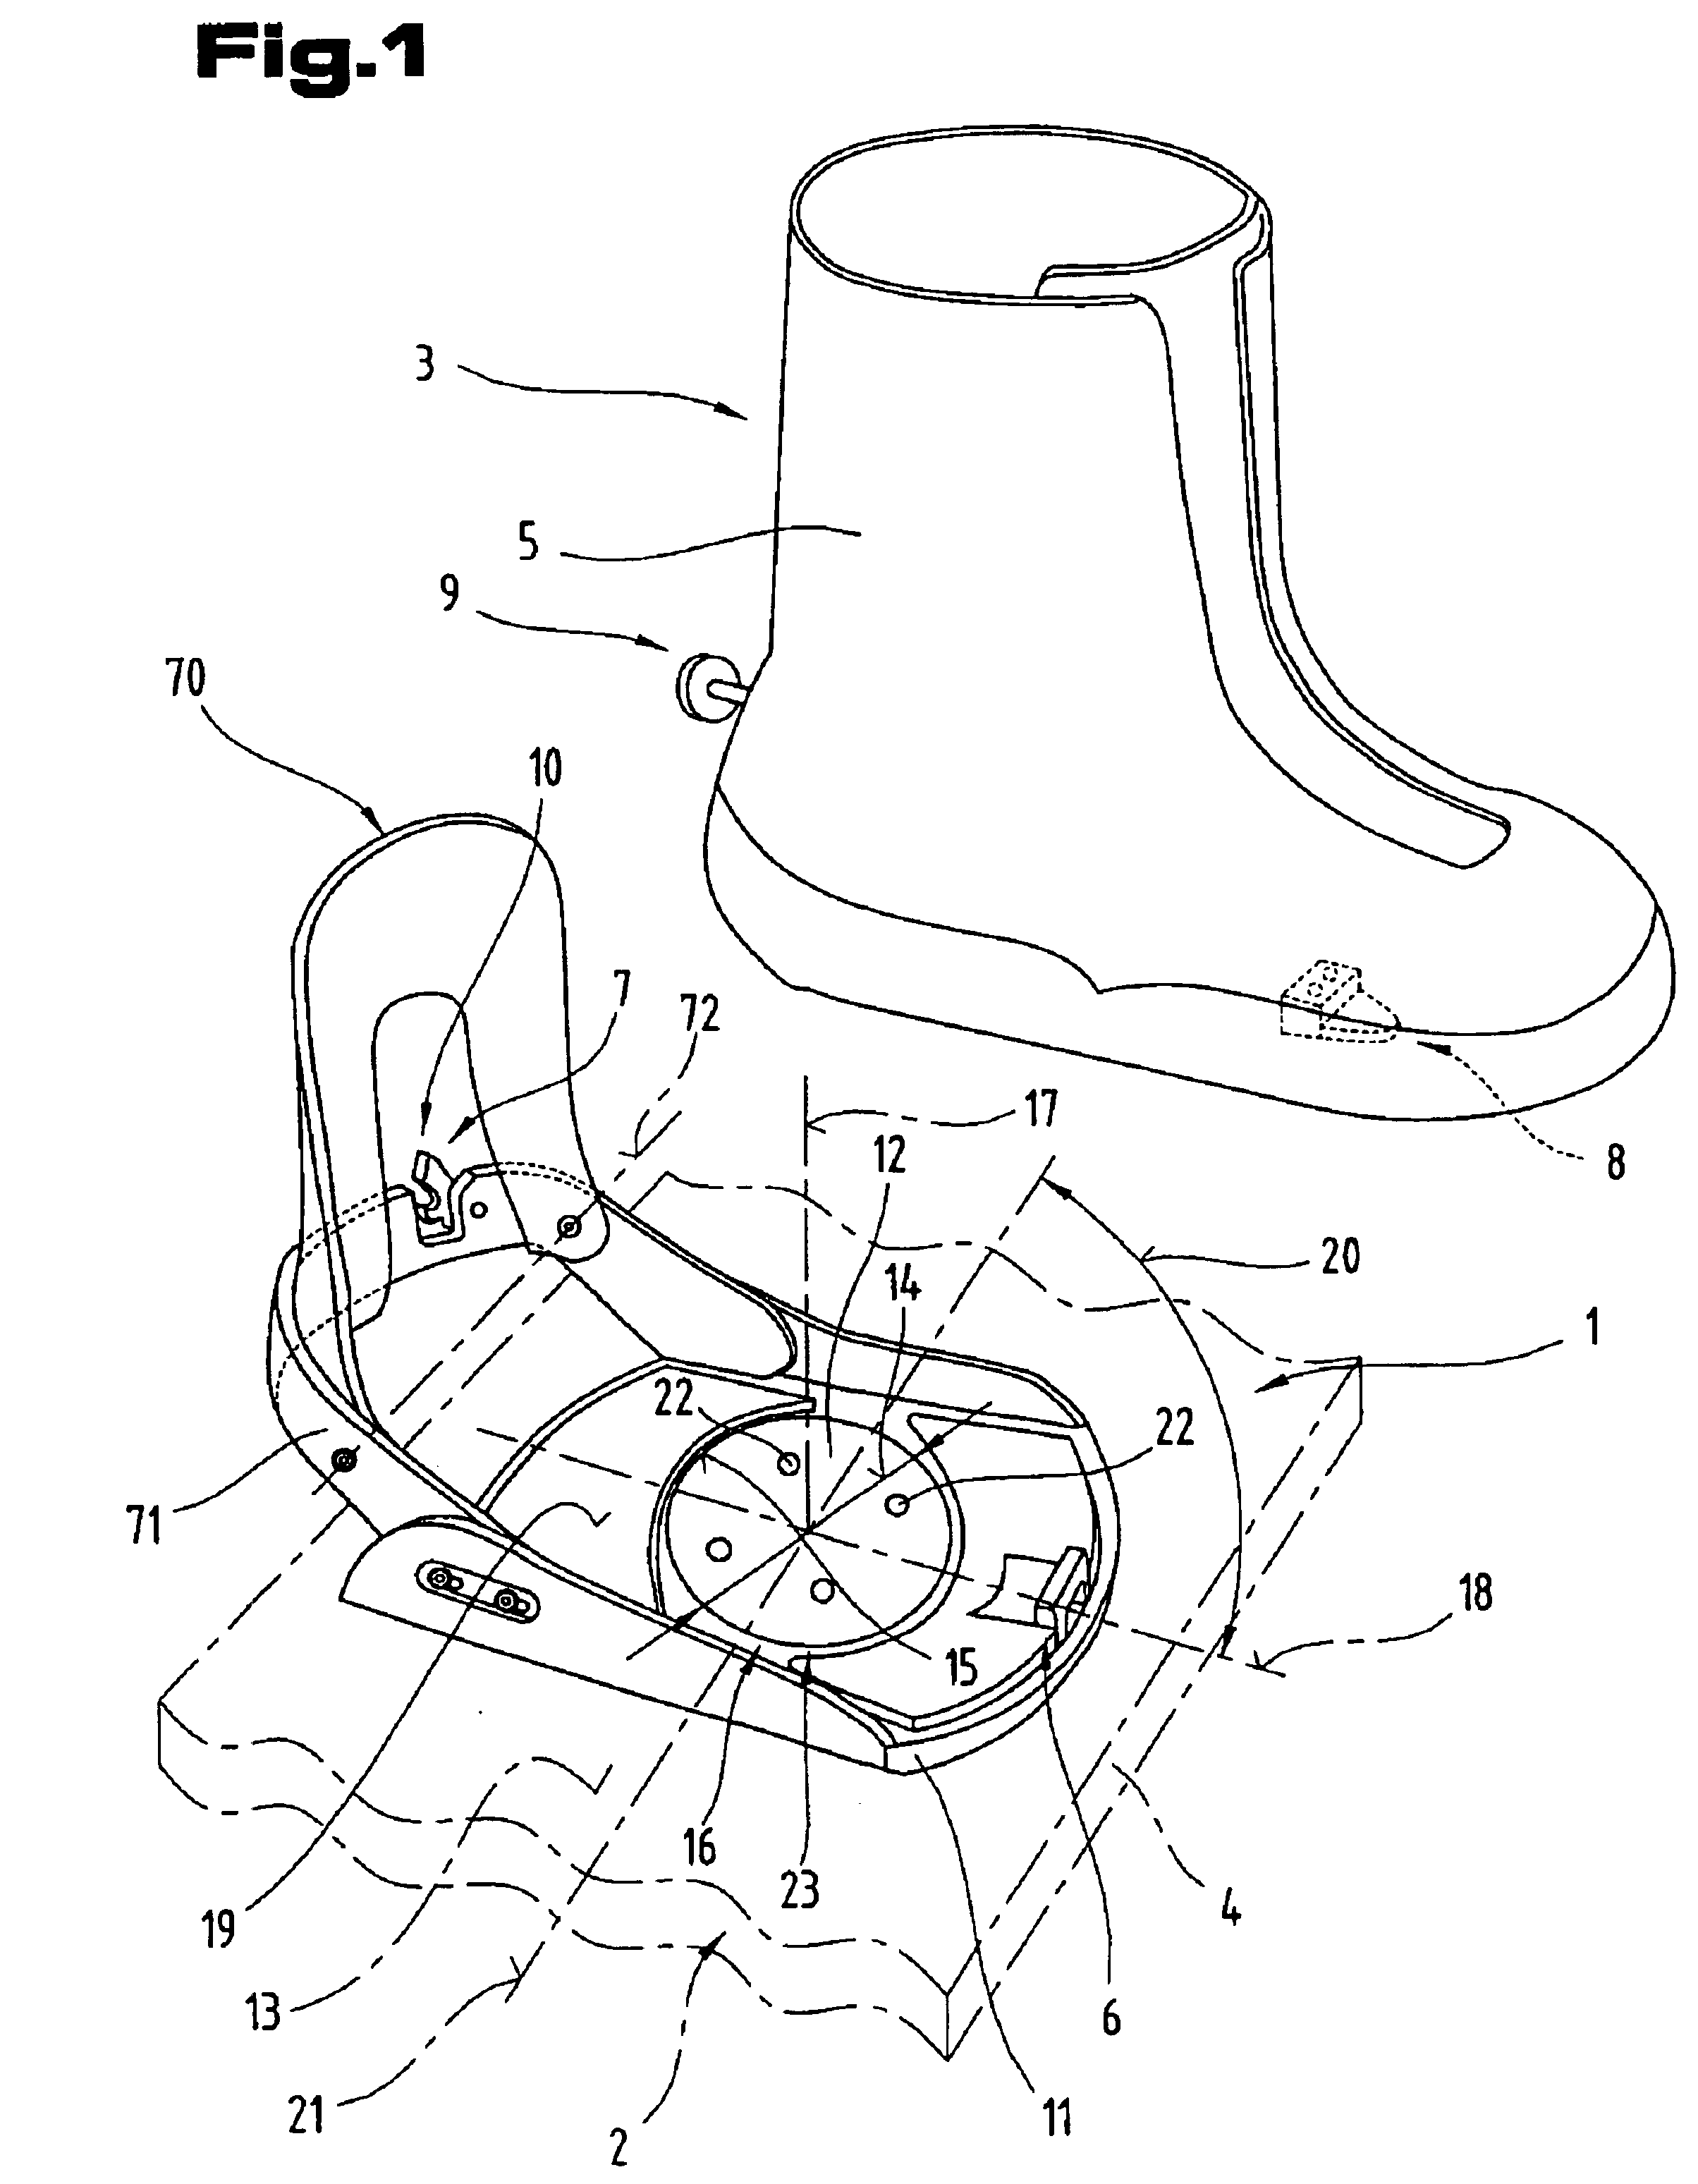 Binding unit for sports devices, in particular for a snowboard